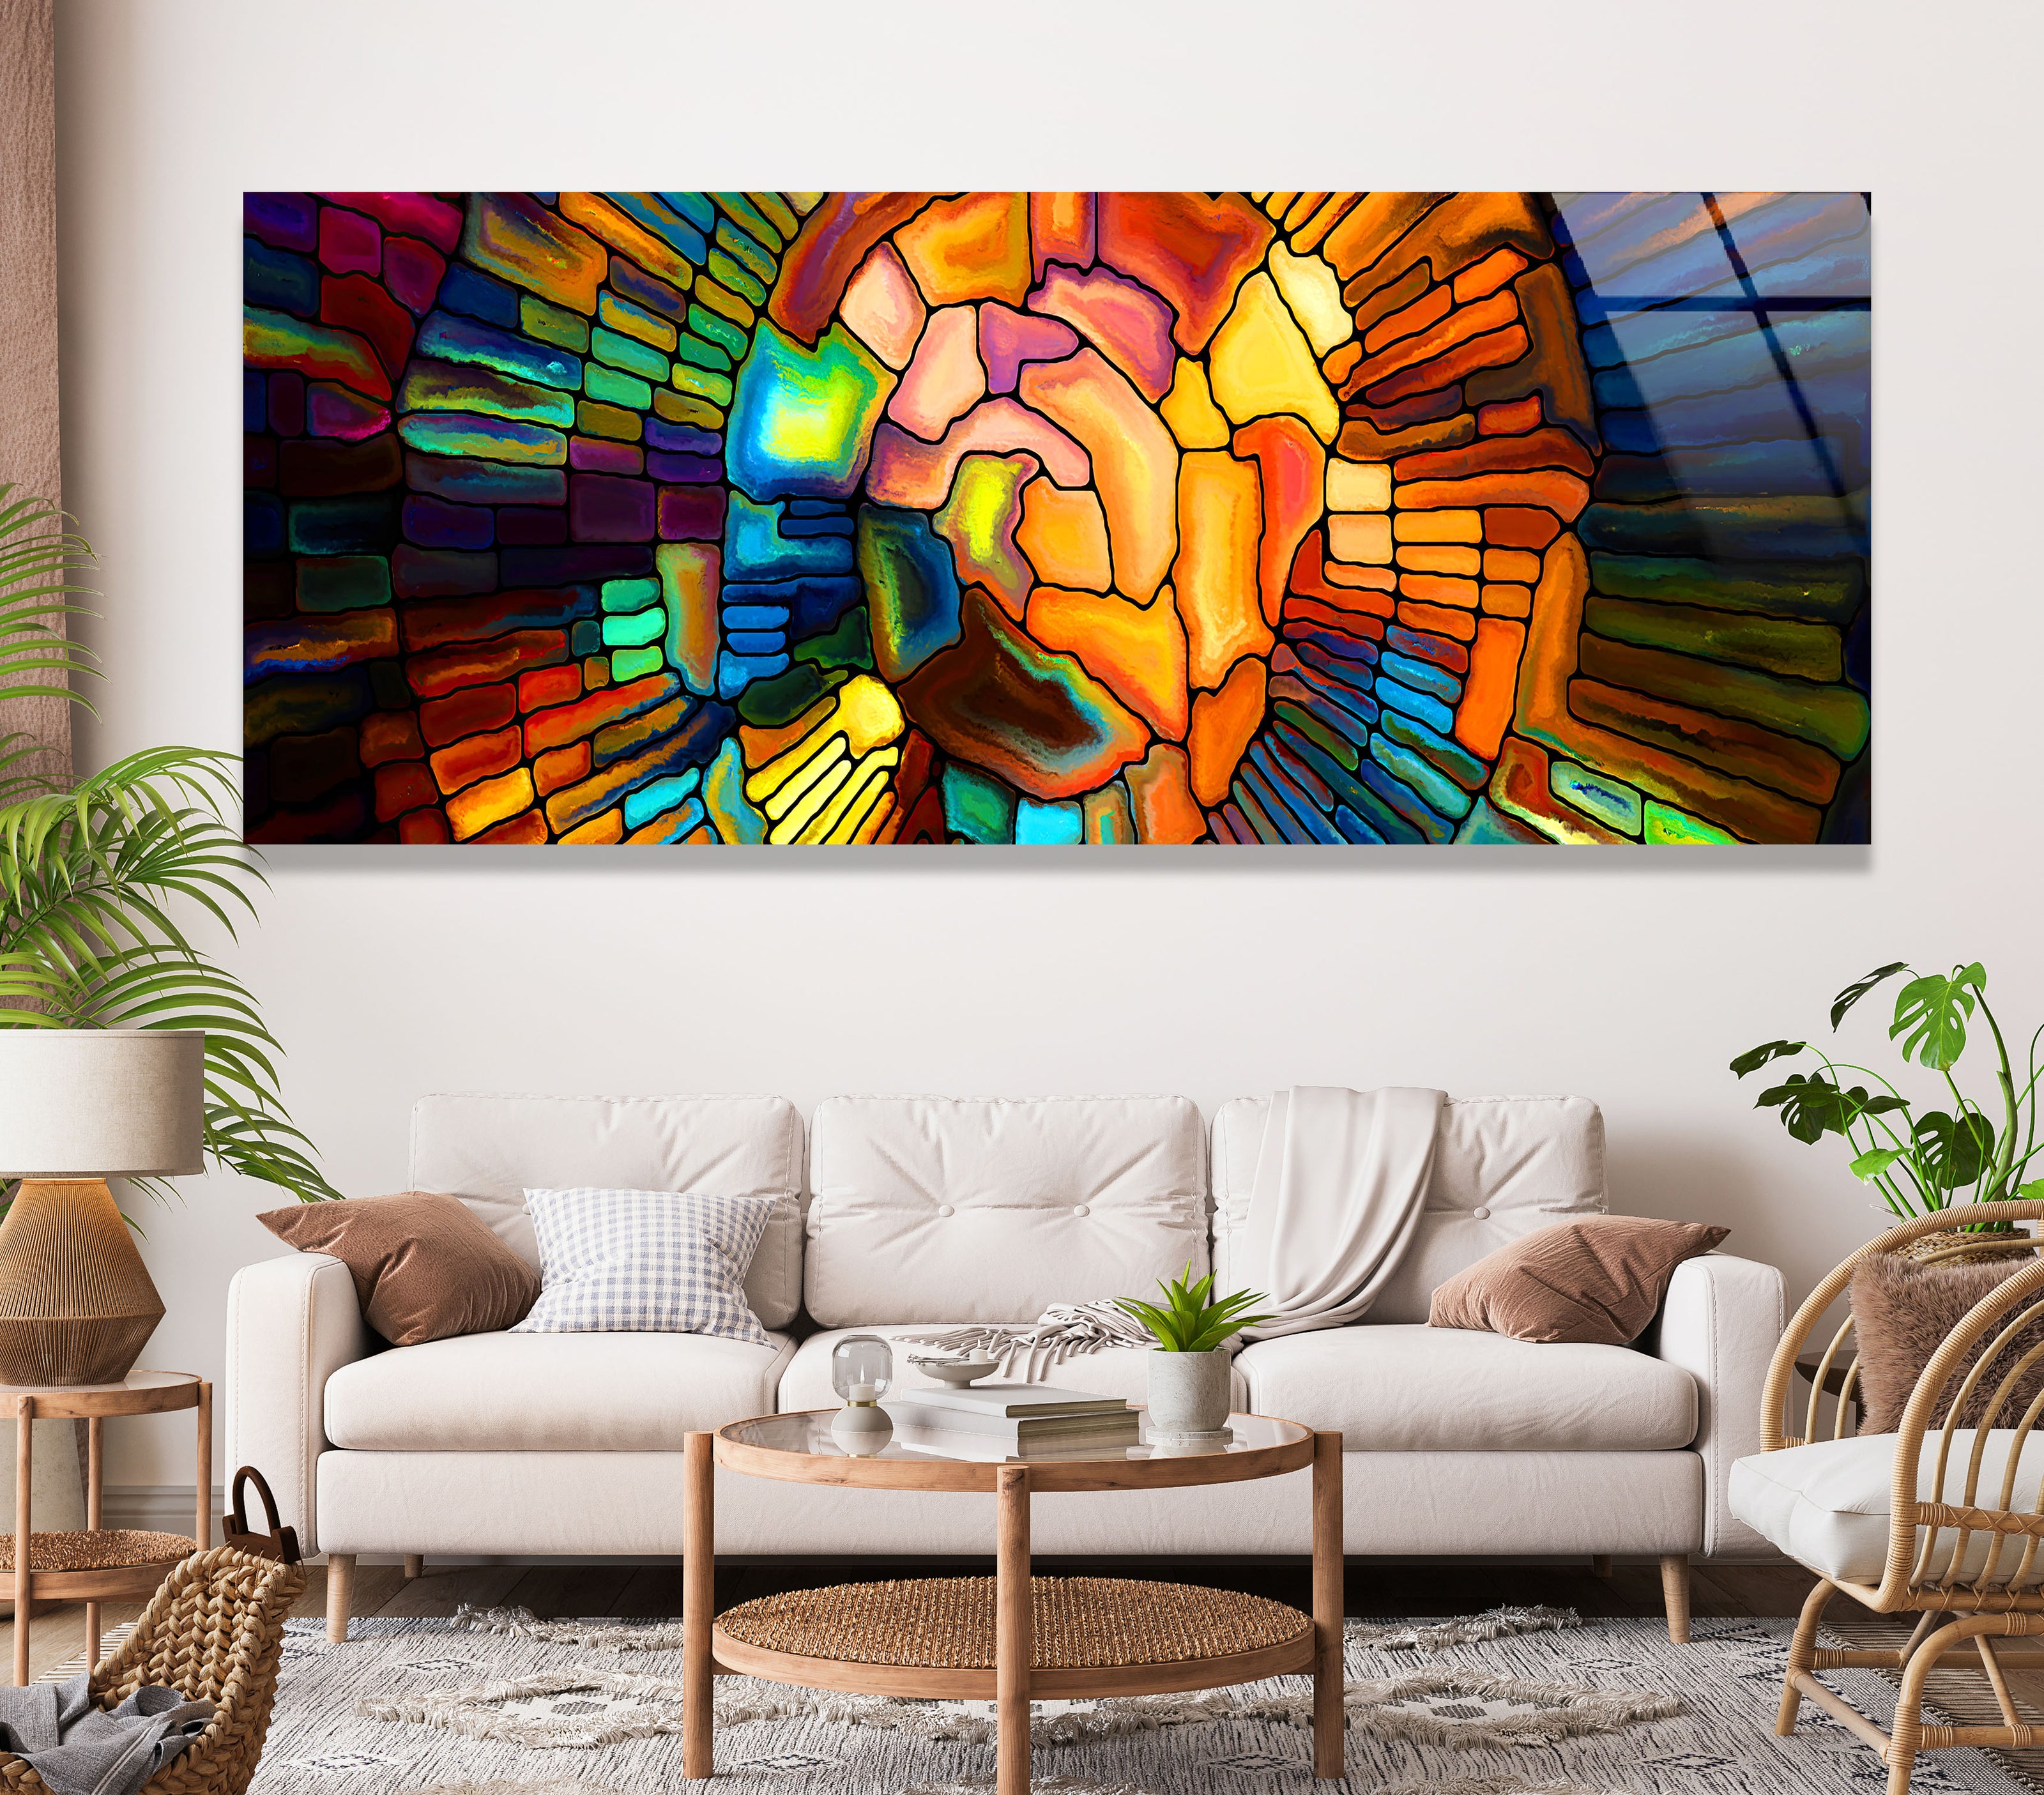 Stained Tempered Glass Wall Art